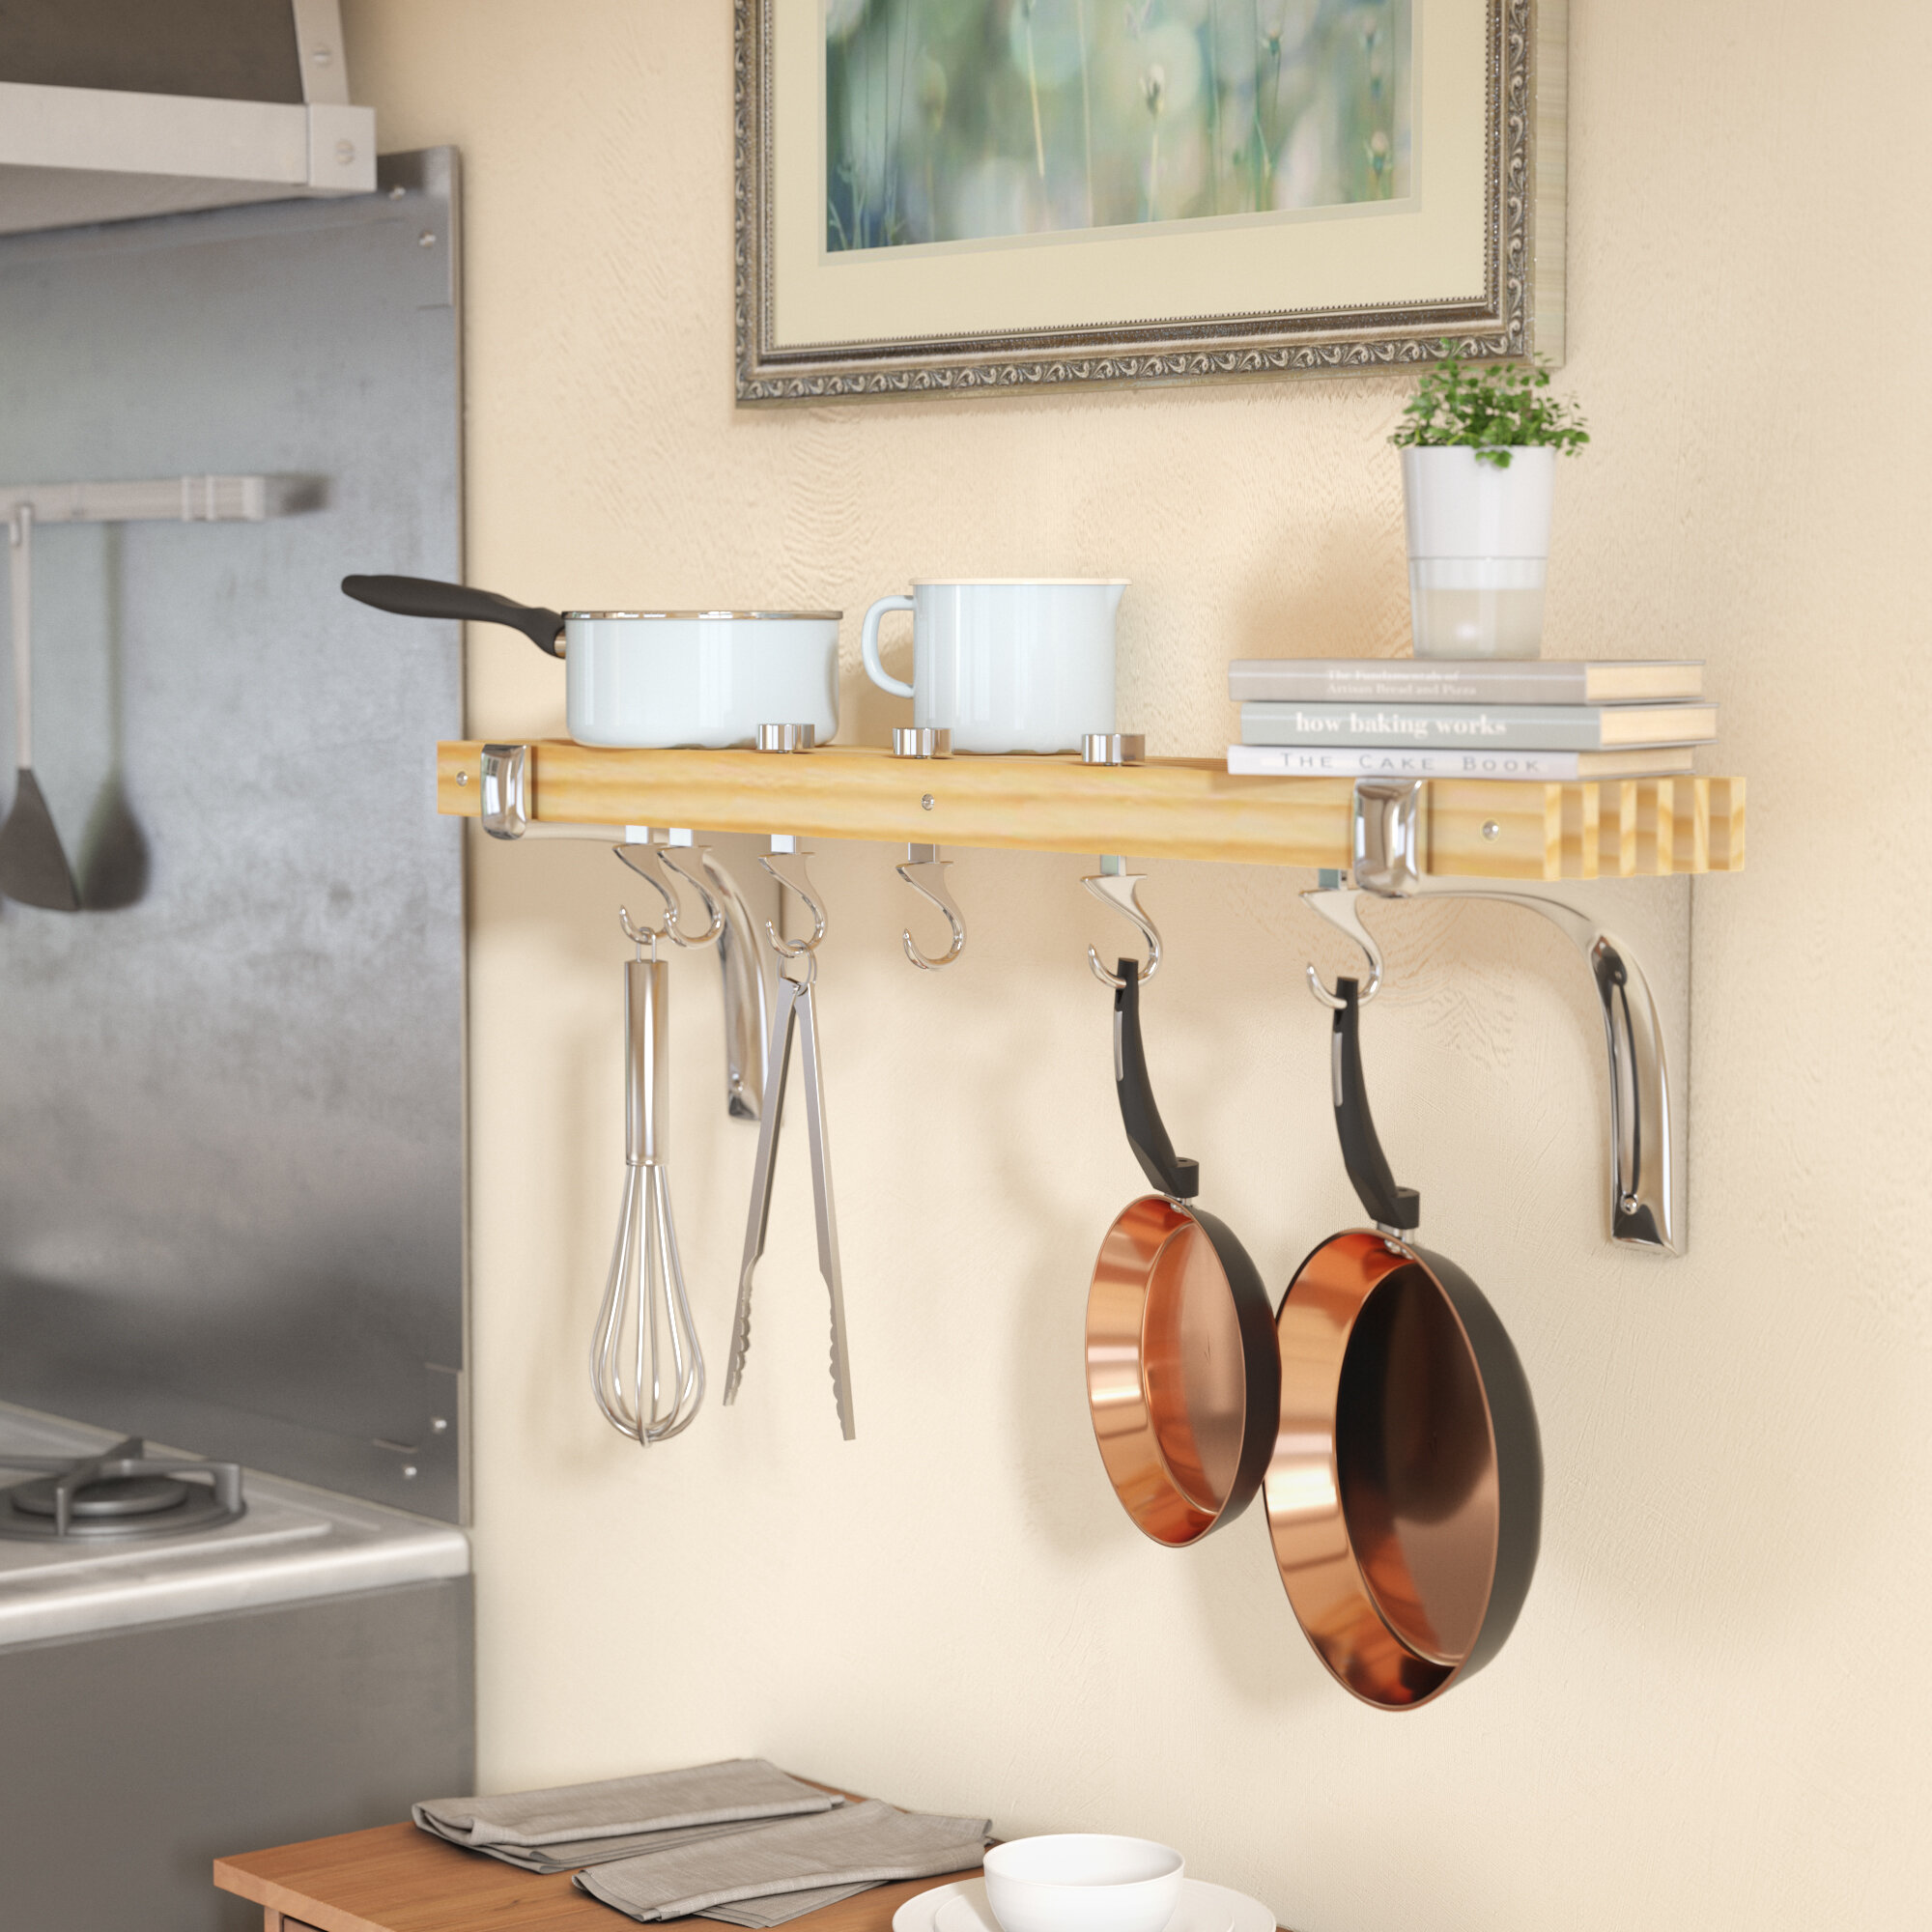 Stainless Steel Wall Mounted Pot Rack Shelf and 18 Hooks 15" x 36" Vertical 